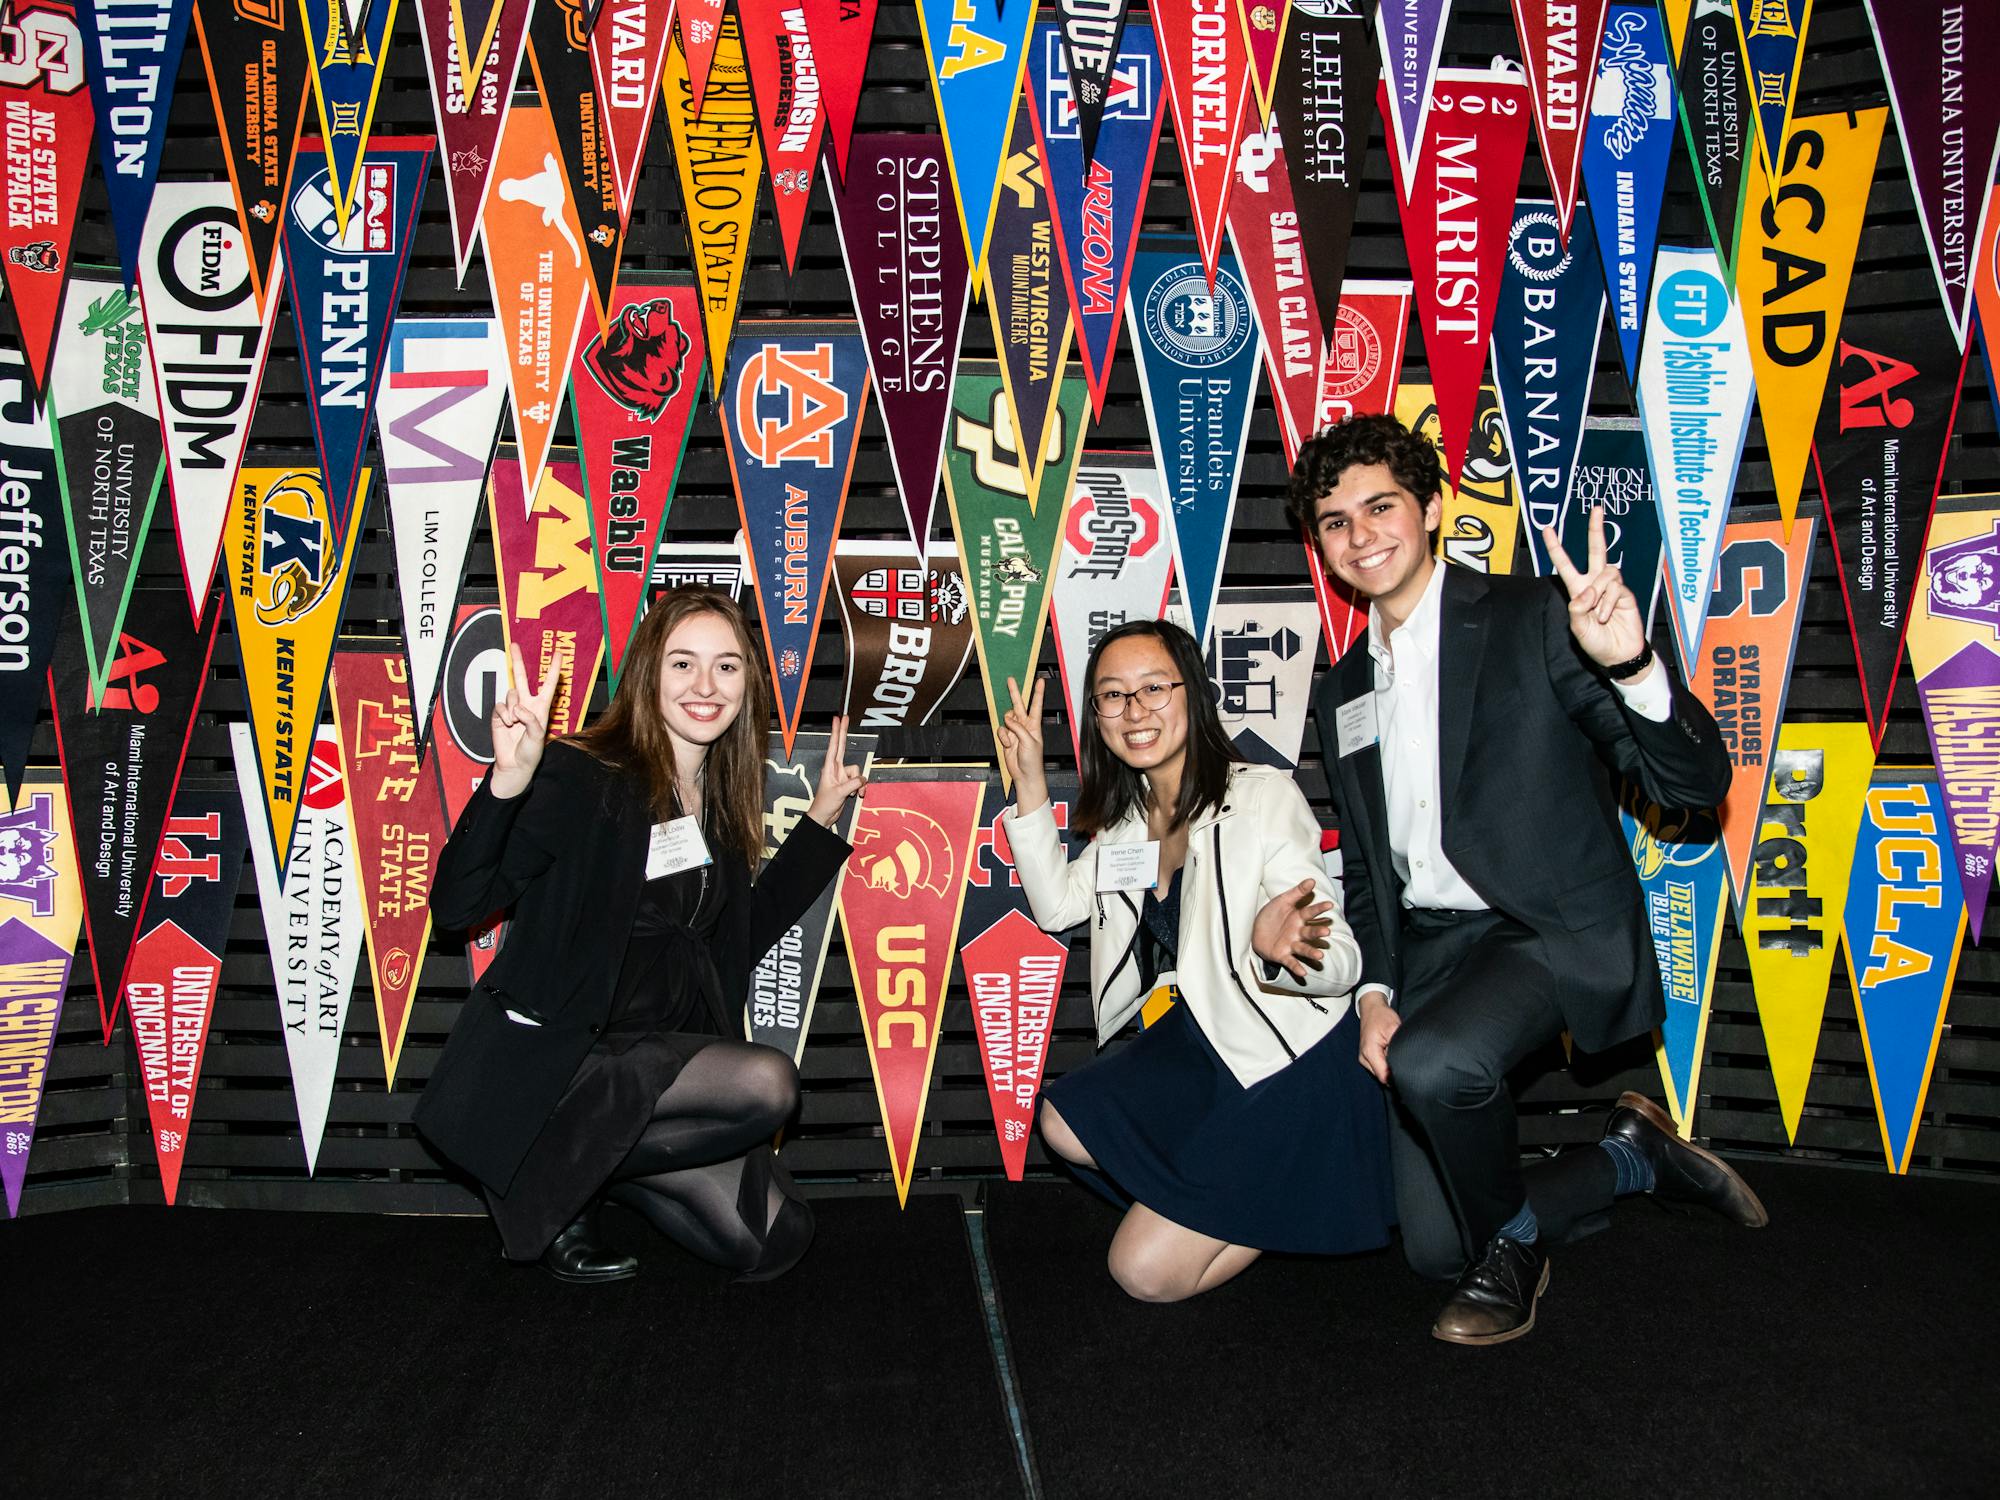 Students standing in front of a wall of school flags